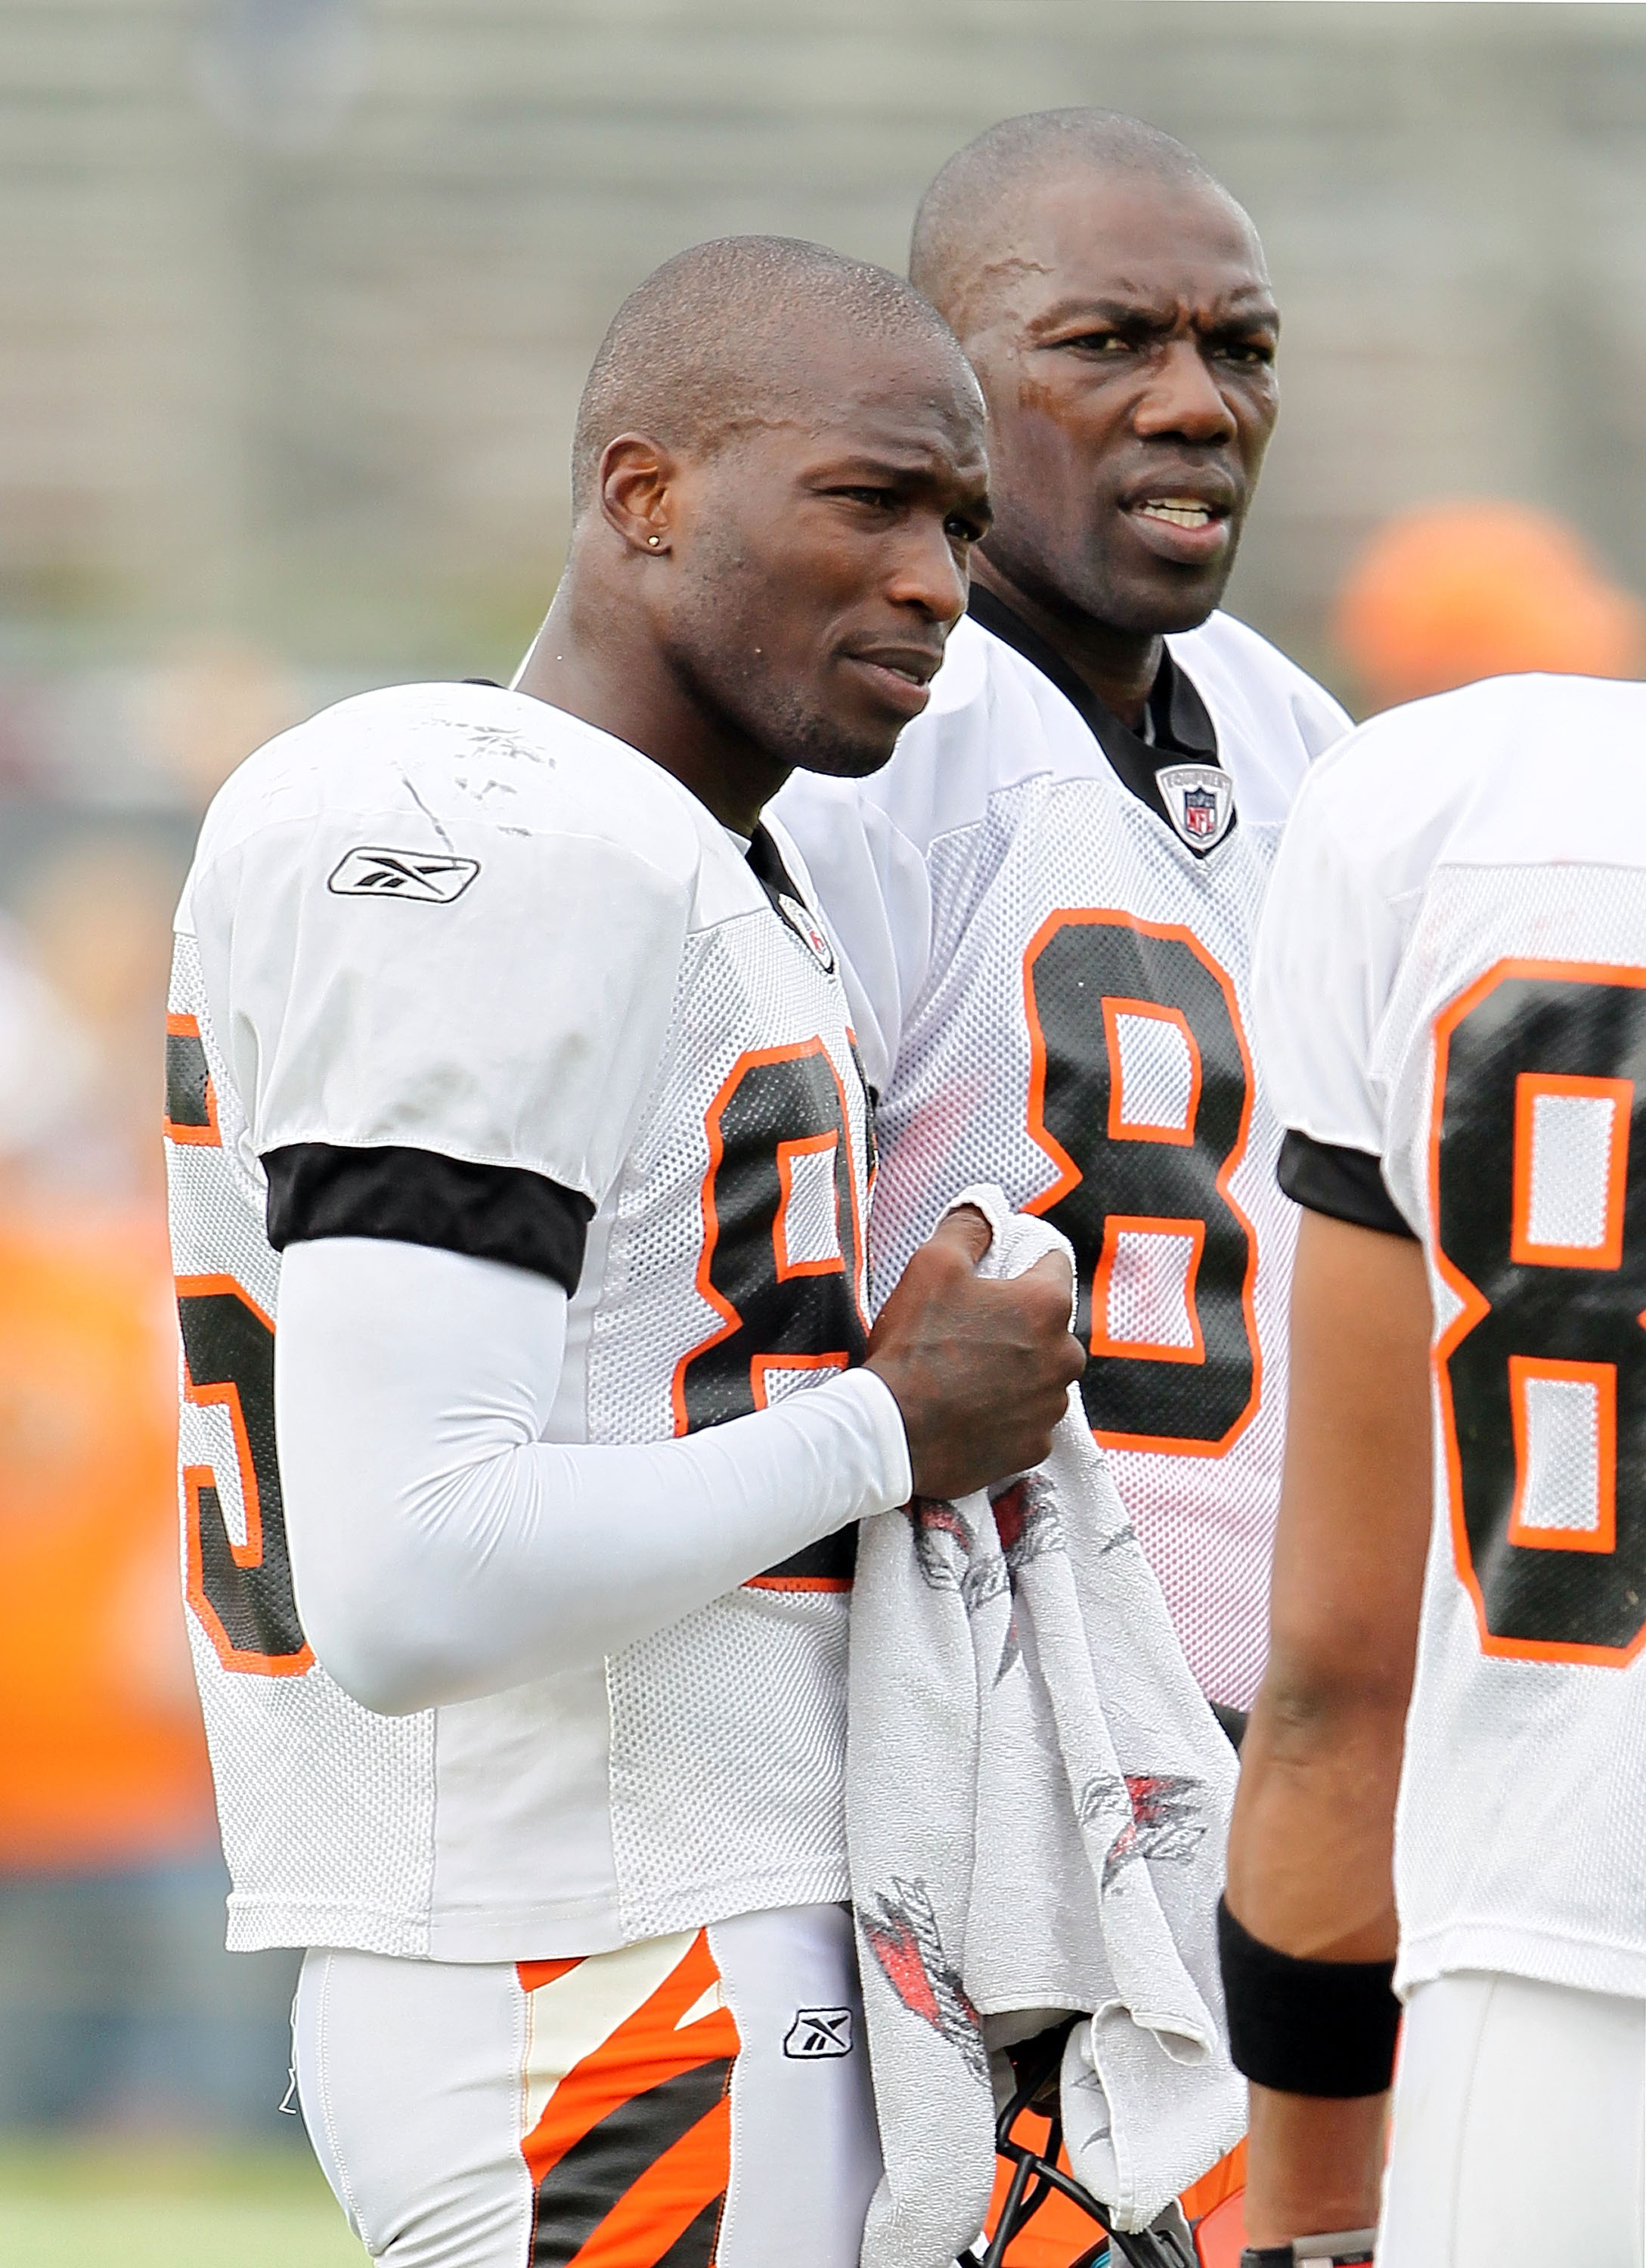 GEORGETOWN, KY - JULY 31:  Chad Ochocinco (left) #85 and Terrell Owens (right) #81 of the Cincinnati Bengals are pictured during the Bengals training camp at Georgetown College on July 31, 2010 in Georgetown, Kentucky.  (Photo by Andy Lyons/Getty Images)